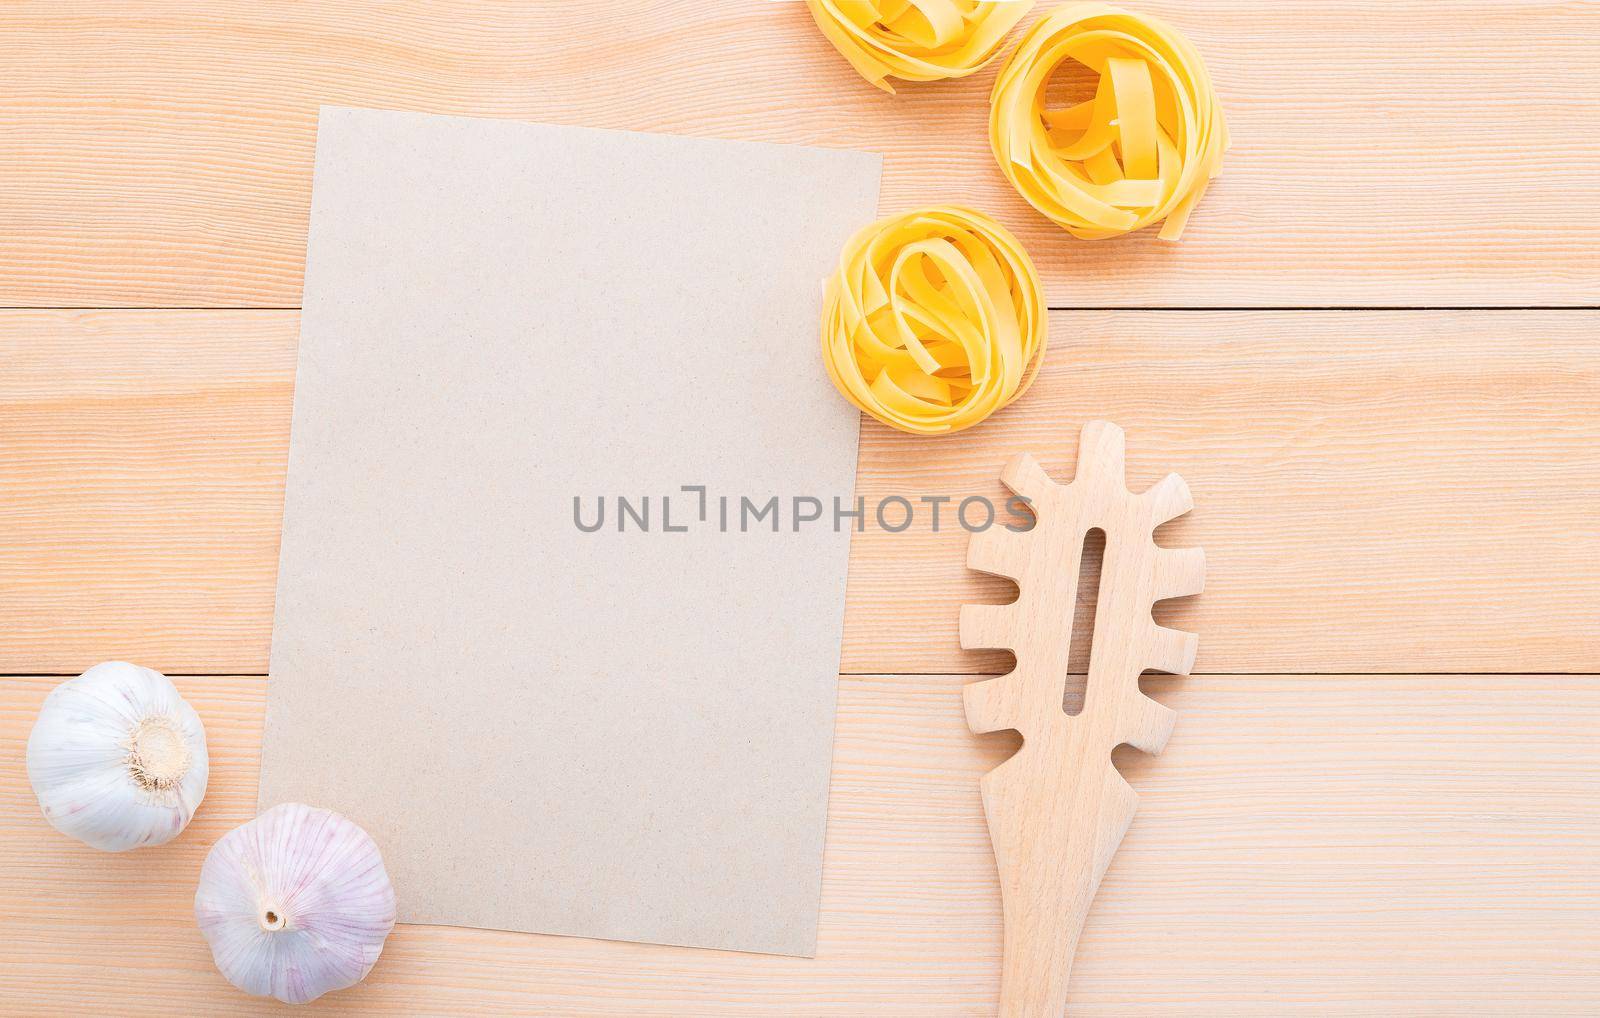 Italian foods concept and menu design . Blank paper and  pasta ladle on wooden background.Food background for tasty Italian dishes with blank brown paper and vintage pasta ladle on wooden background. Top view italian foods concept and menu design with copy space. by kerdkanno